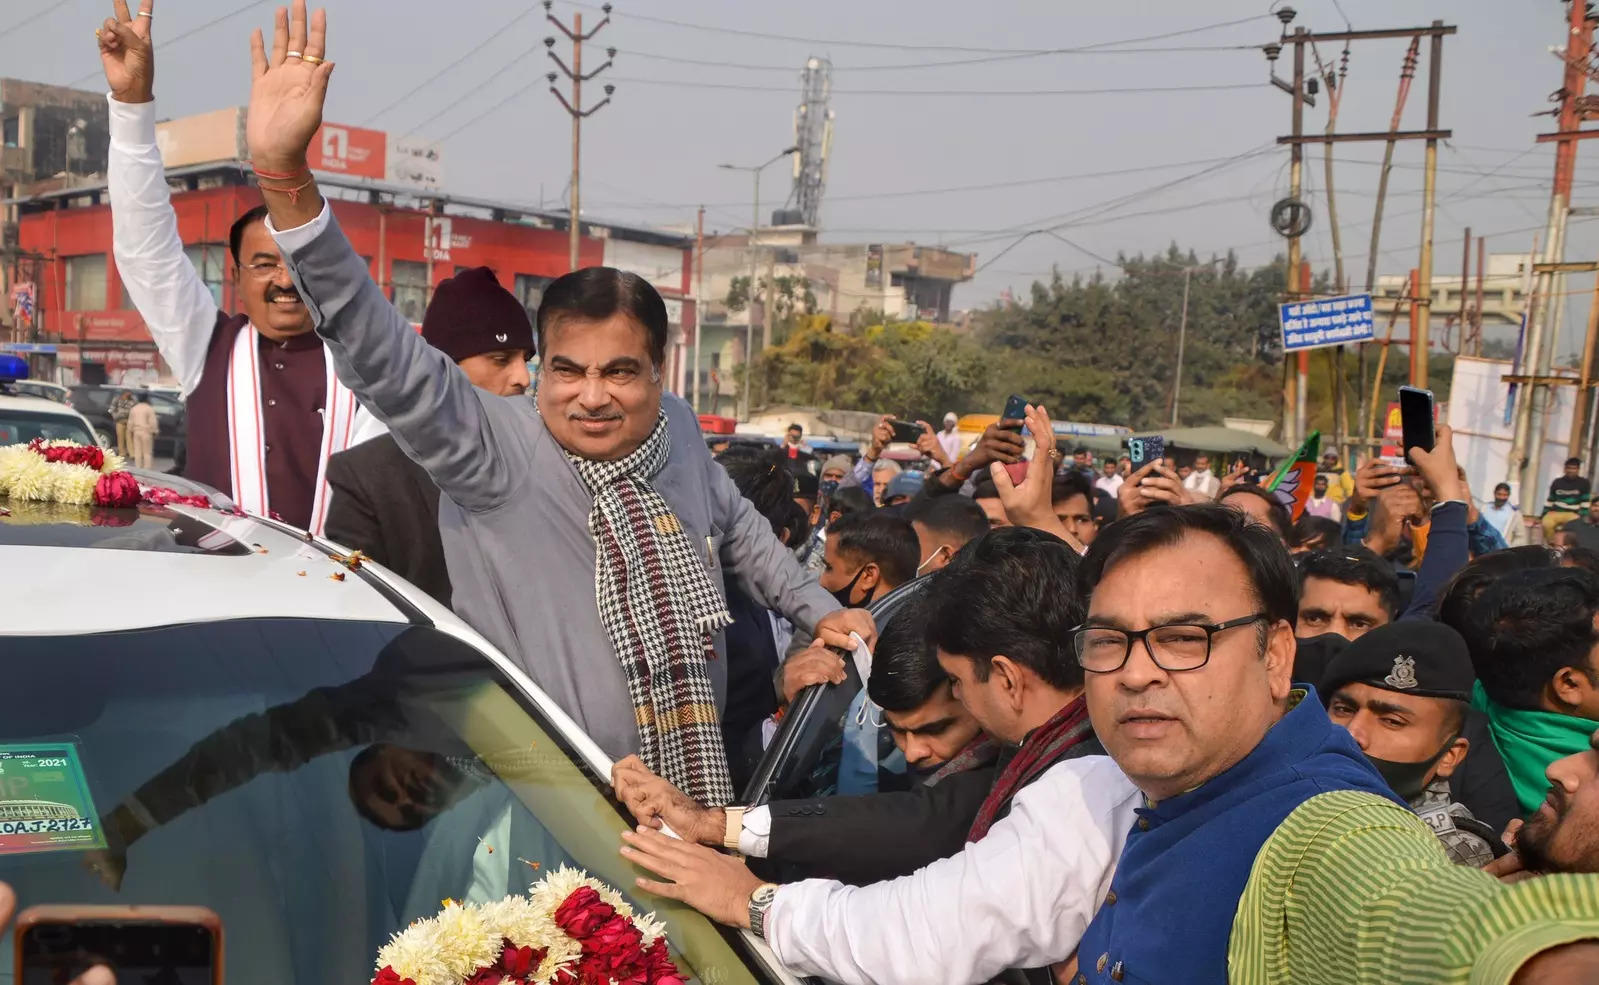 Gadkari promises US-like roads, announces investment of Rs 5 lakh crore on road projects in UP